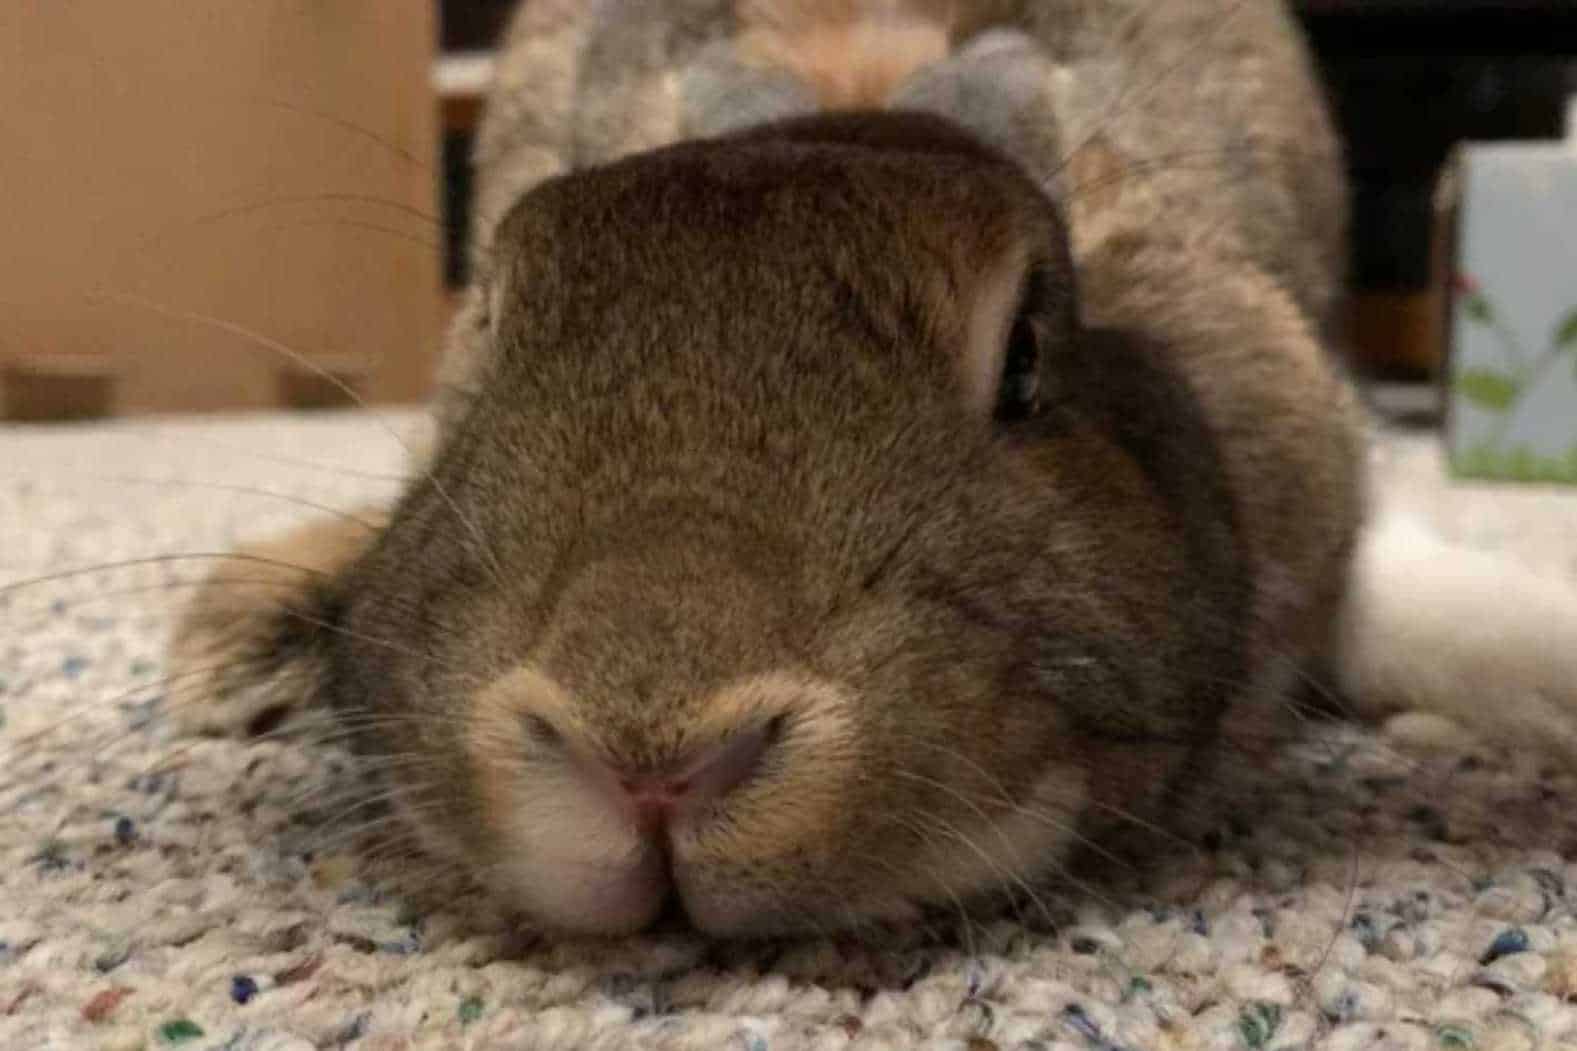 what sound does a bunny make